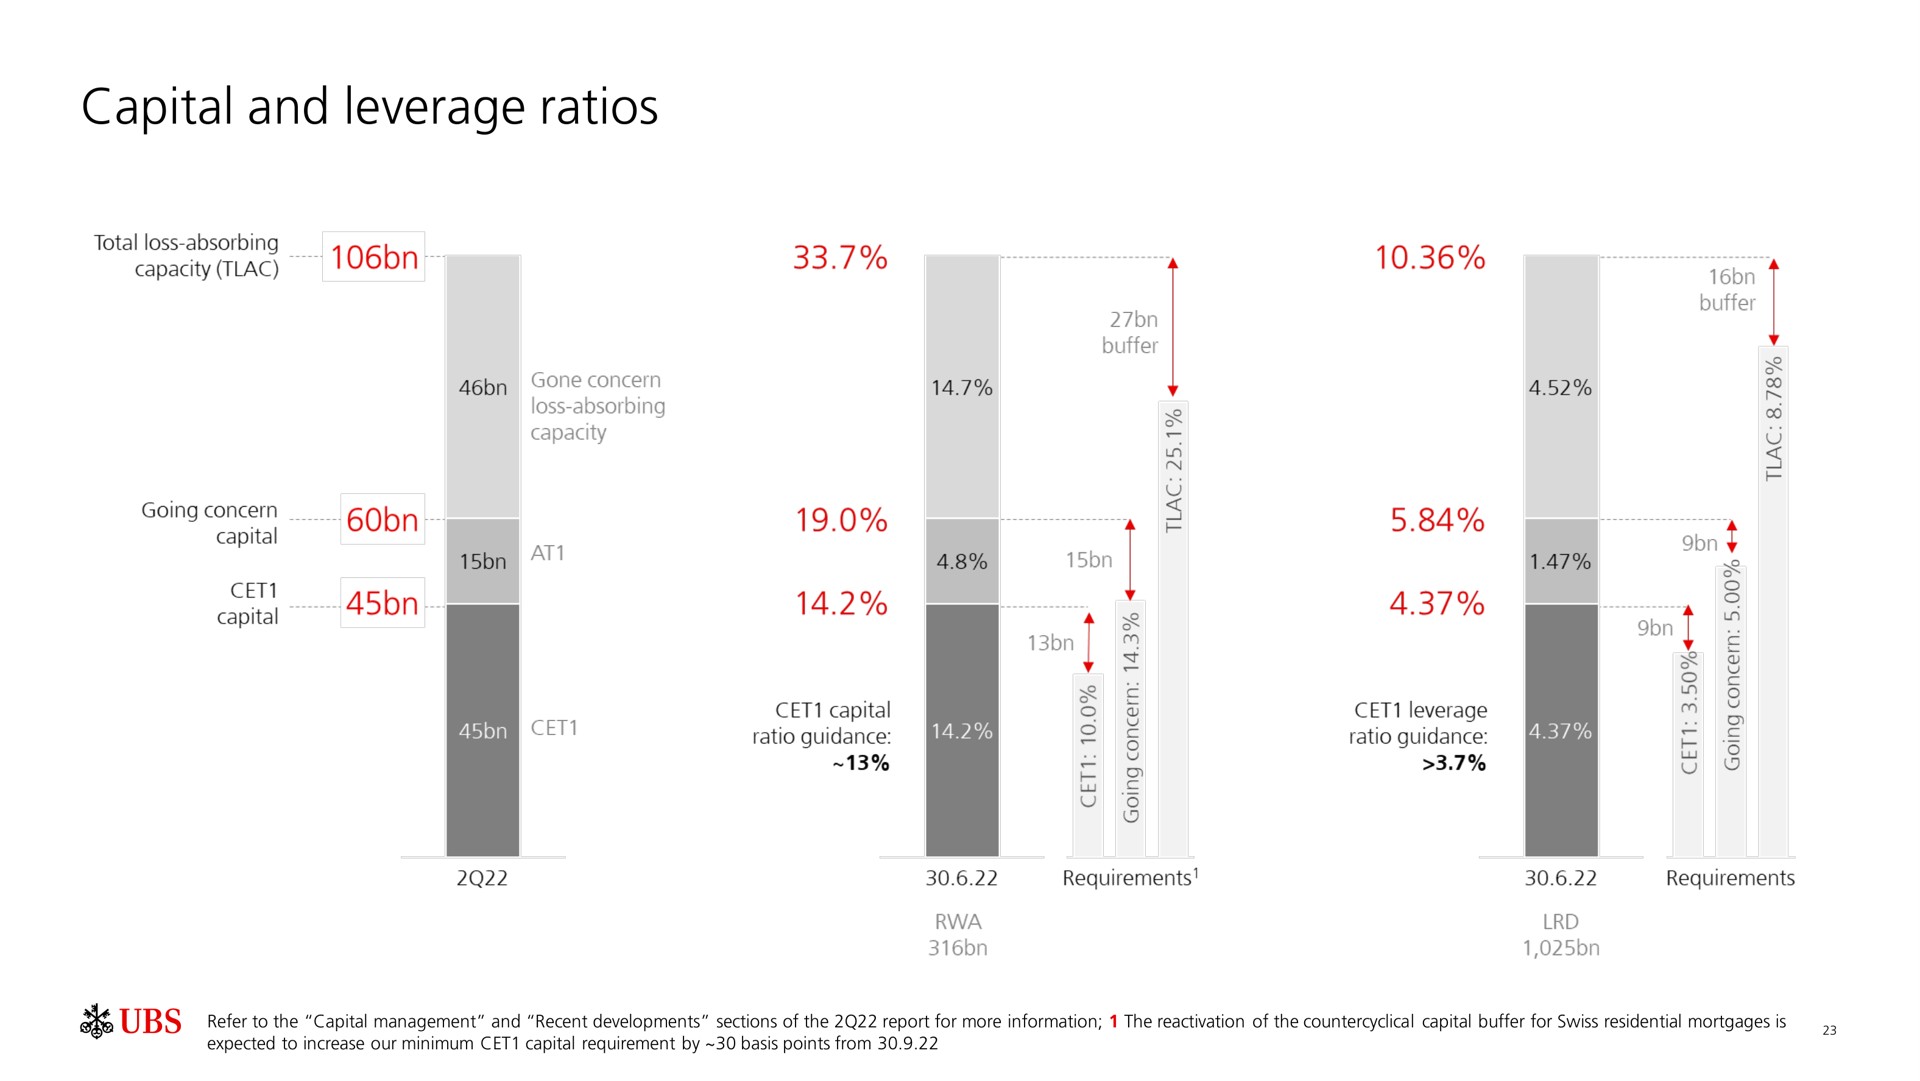 capital and leverage ratios cee bag geing con | UBS